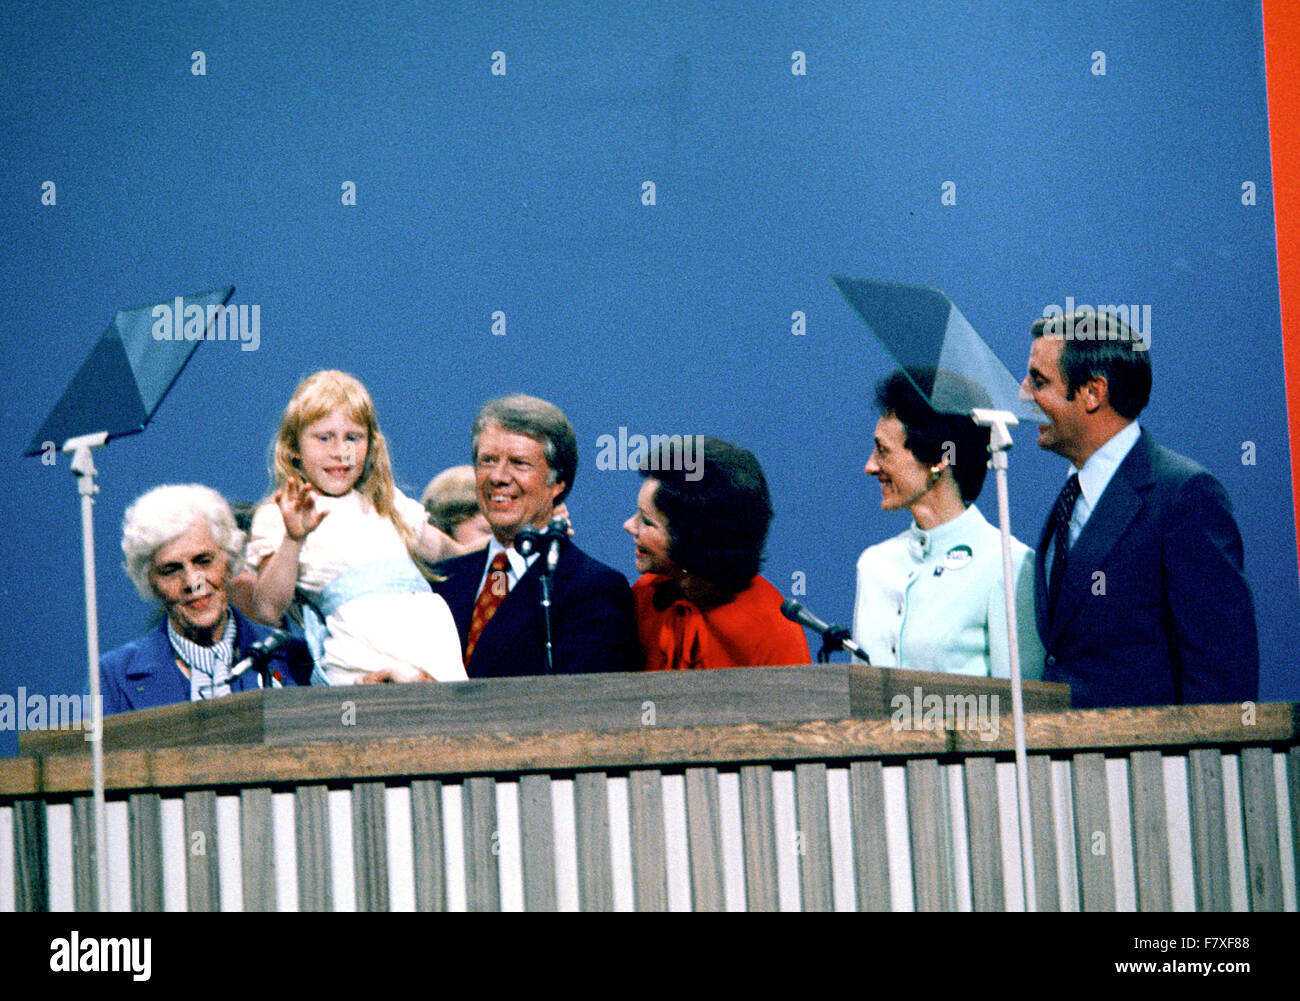 Governor Jimmy Carter (Democrat of Georgia), the 1976 Democratic Party nominee for President of the United States, following his acceptance speech at the 1976 Democratic Convention at Madison Square Garden, New York, New York on July 15, 1976. From left to right: Miss Lillian Carter, Jimmy Carter's mother; Amy Carter, daughter; Gov. Carter; wife Rosalynn Carter; US Senator Walter Mondale (Democrat of Minnesota), the 1976 Democratic Party nominee for Vice President of the US; and Mondale's wife, Joan Mondale. Credit: Arnie Sachs/CNP - NO WIRE SERVICE - Stock Photo